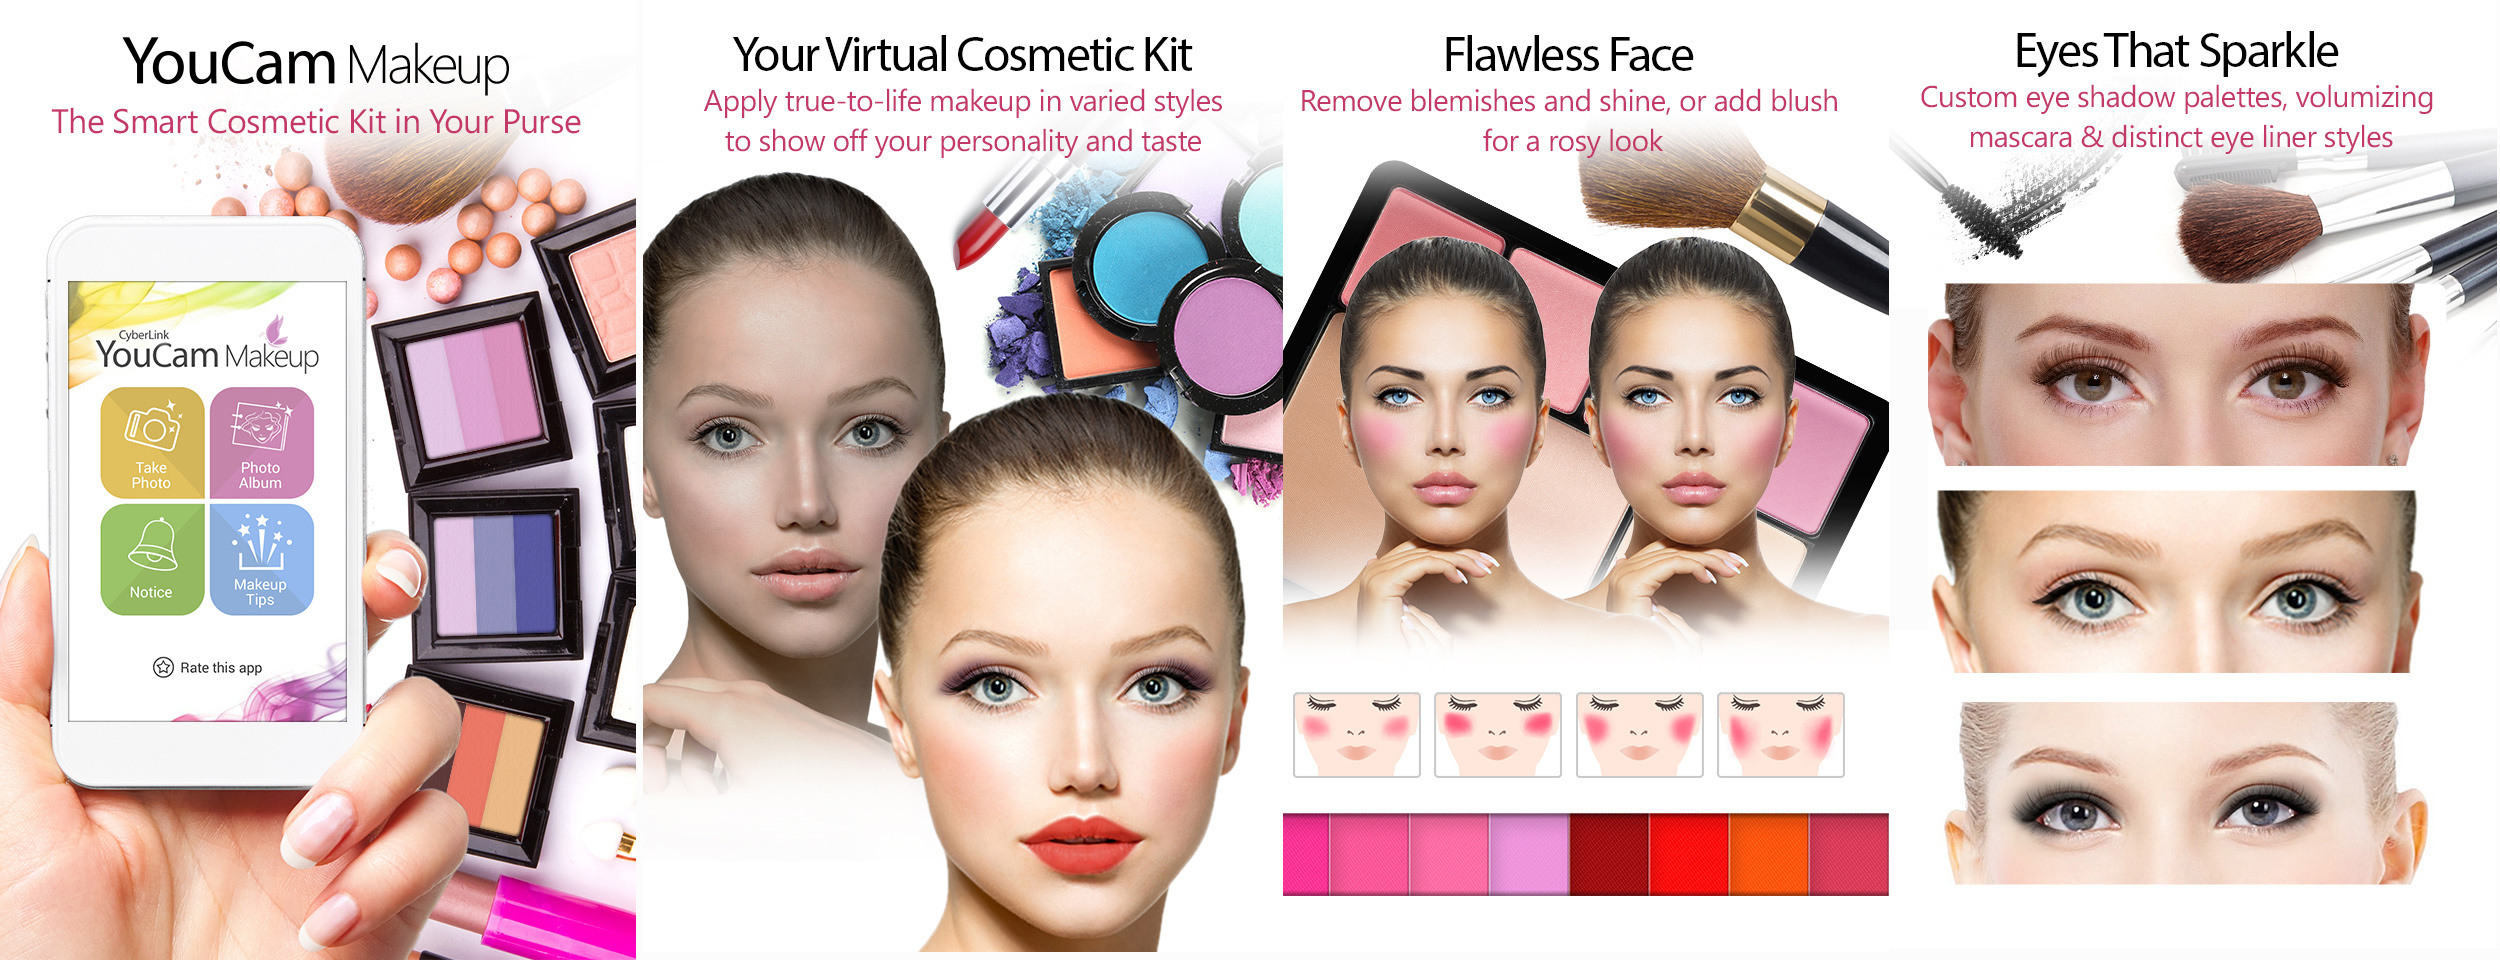 CyberLink Announces New YouCam Makeup App the Smart Cosmetic Kit in Your Purse | Business Wire